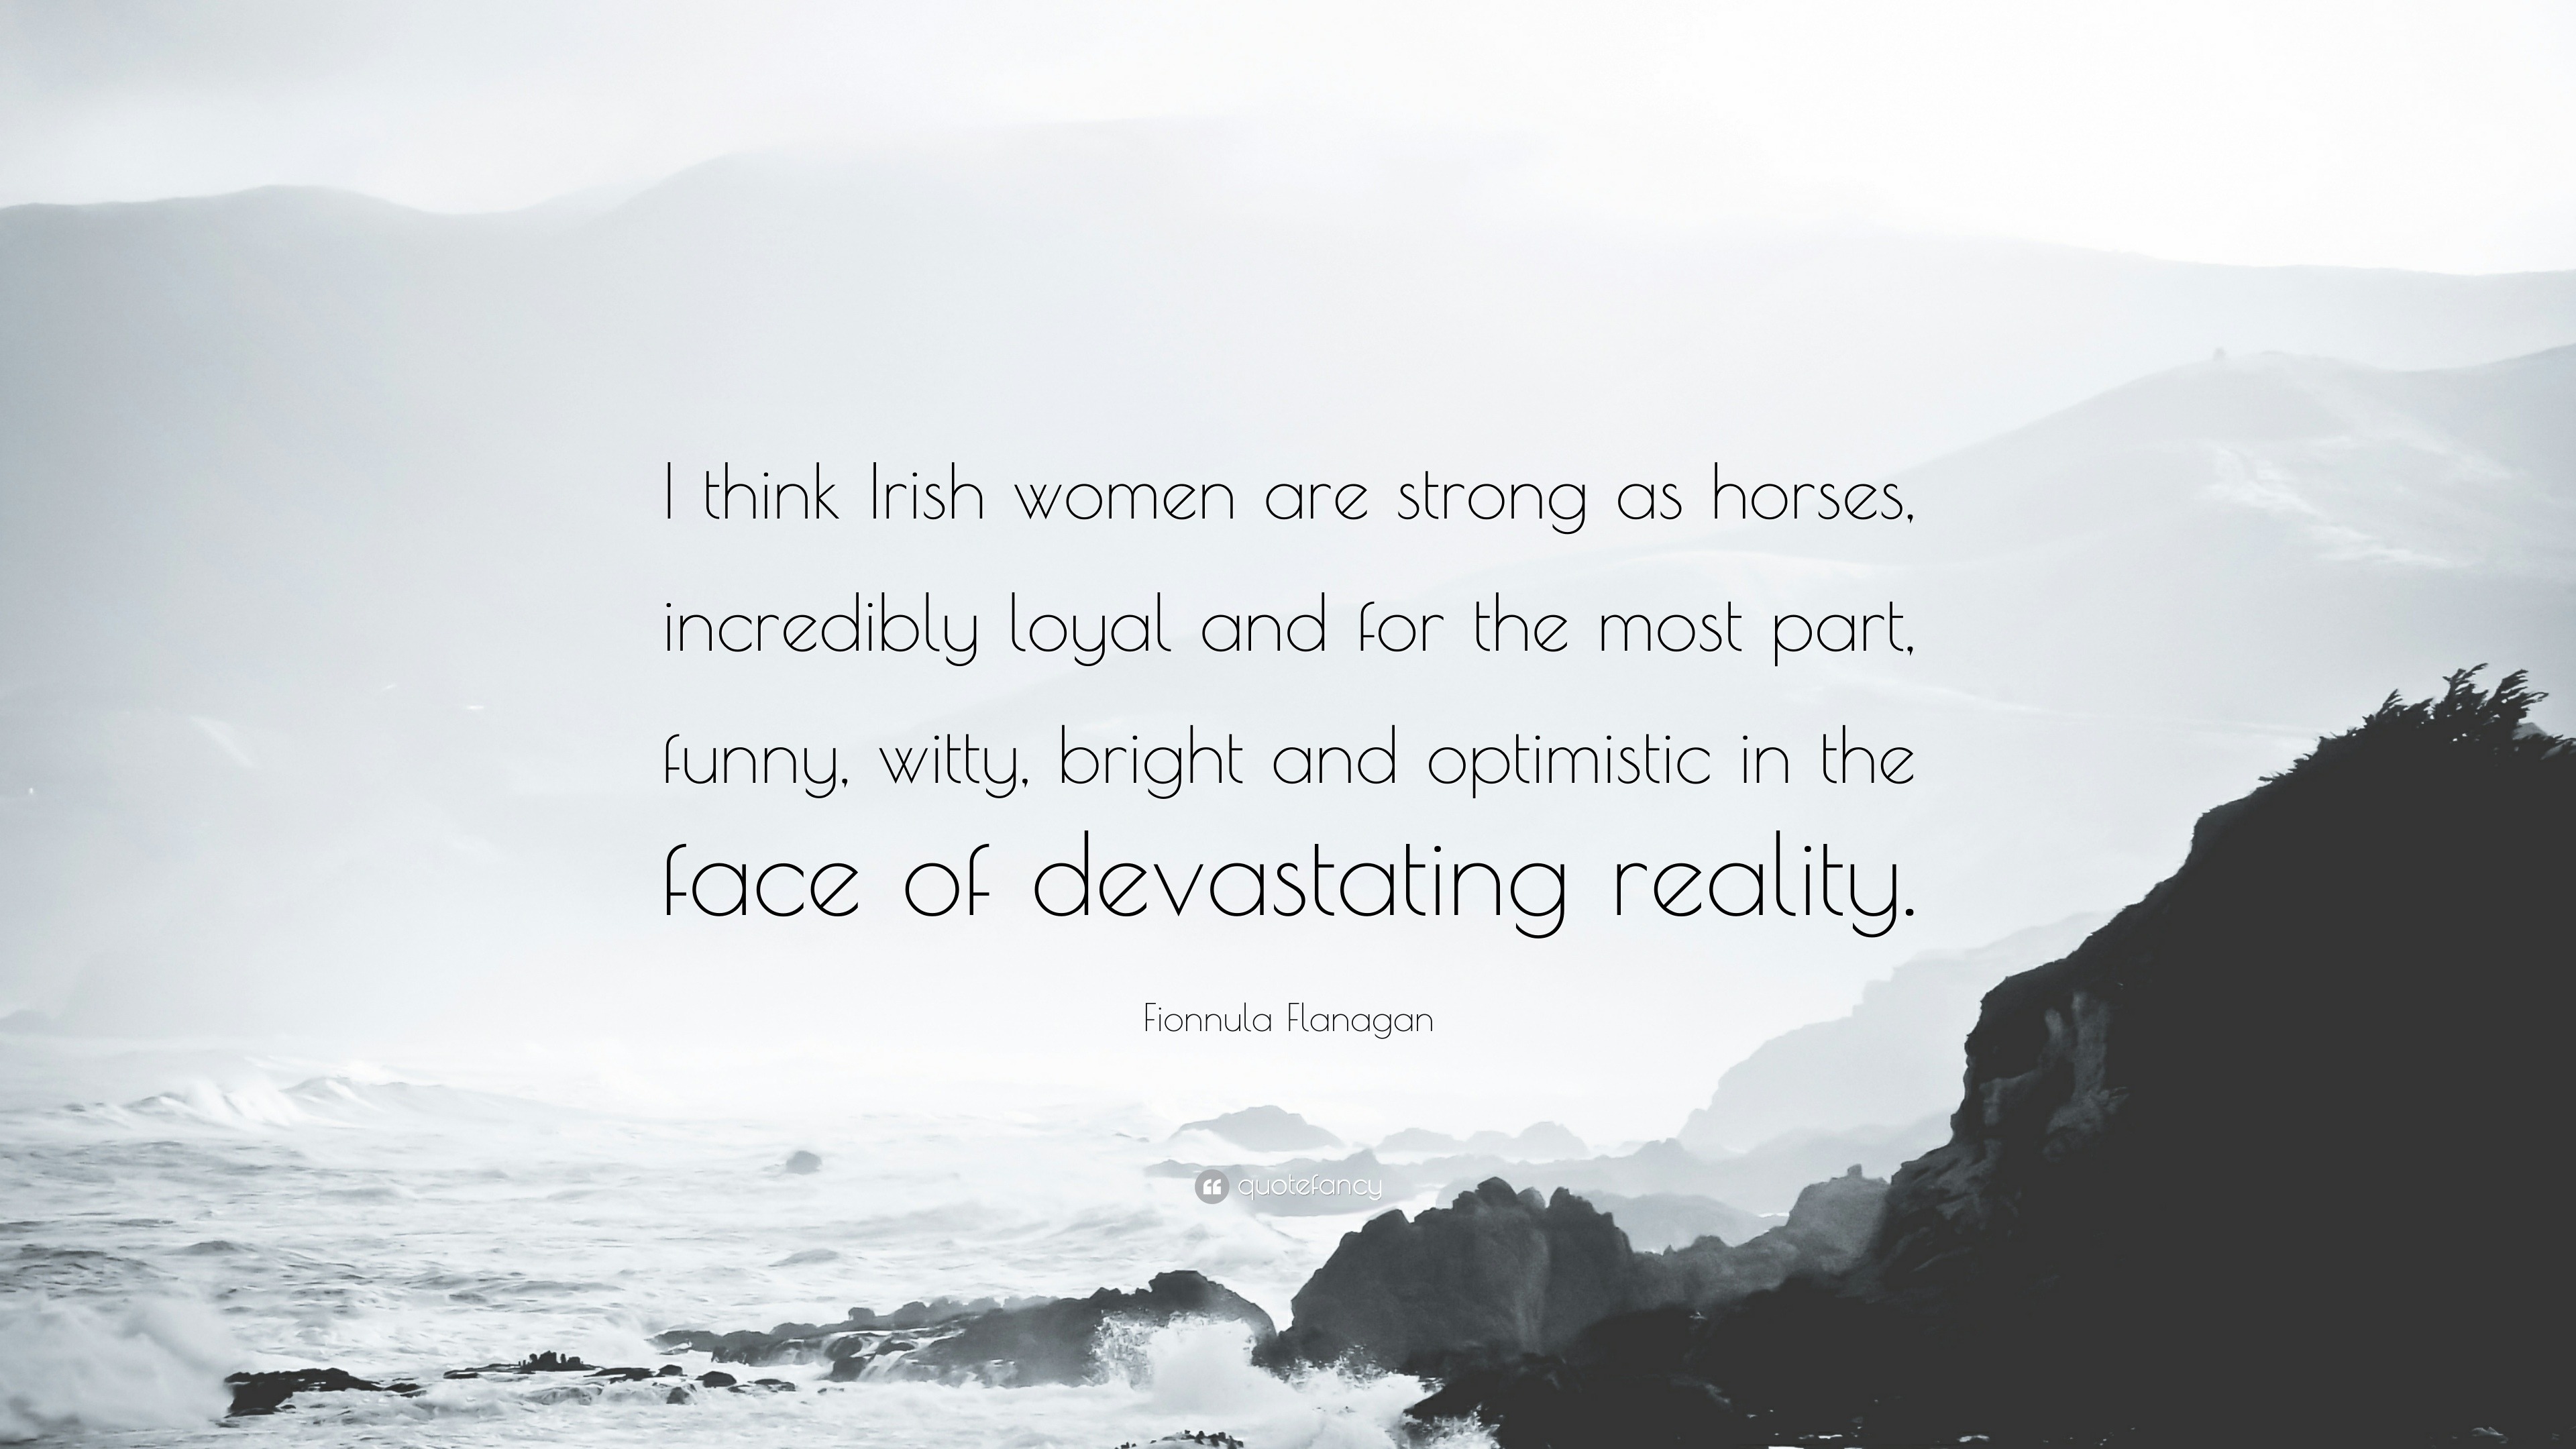 Fionnula Flanagan Quote: “I think Irish women are strong as horses,  incredibly loyal and for the most part, funny, witty, bright and optimistic  in...”